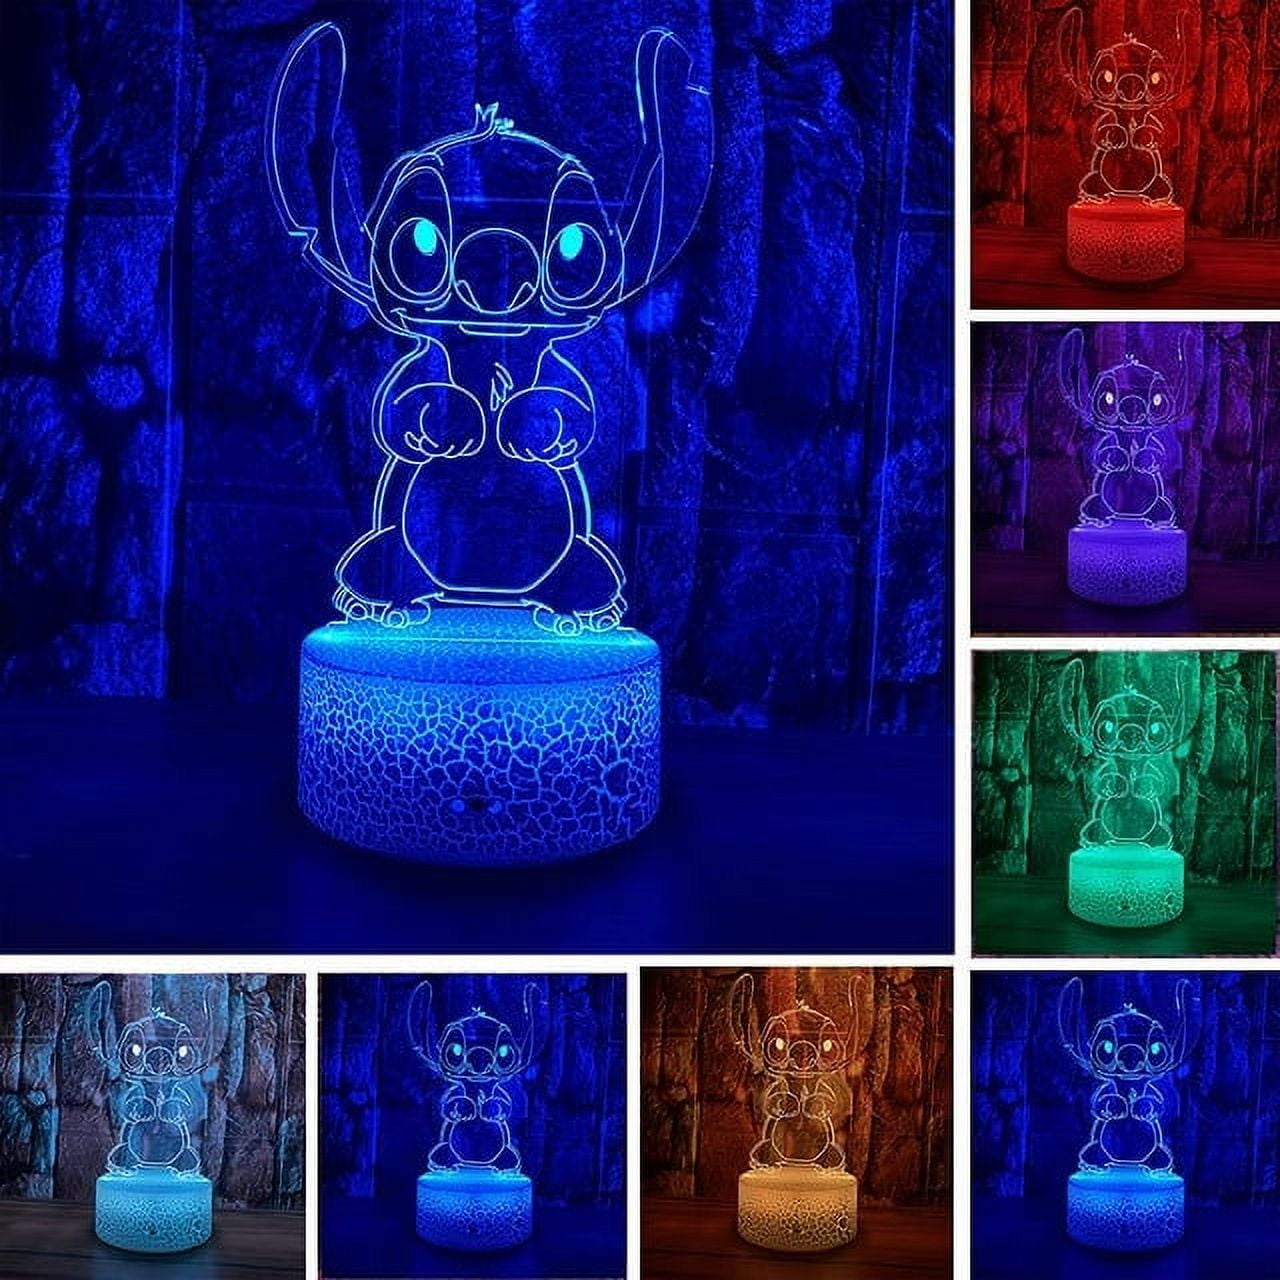 AmazerGift Stitch Night Light for Kids,Stitch Gifts,Christmas and Birthday Party Supplies for Boys/Girls, Stitch Decoration 3D Night Light, 16